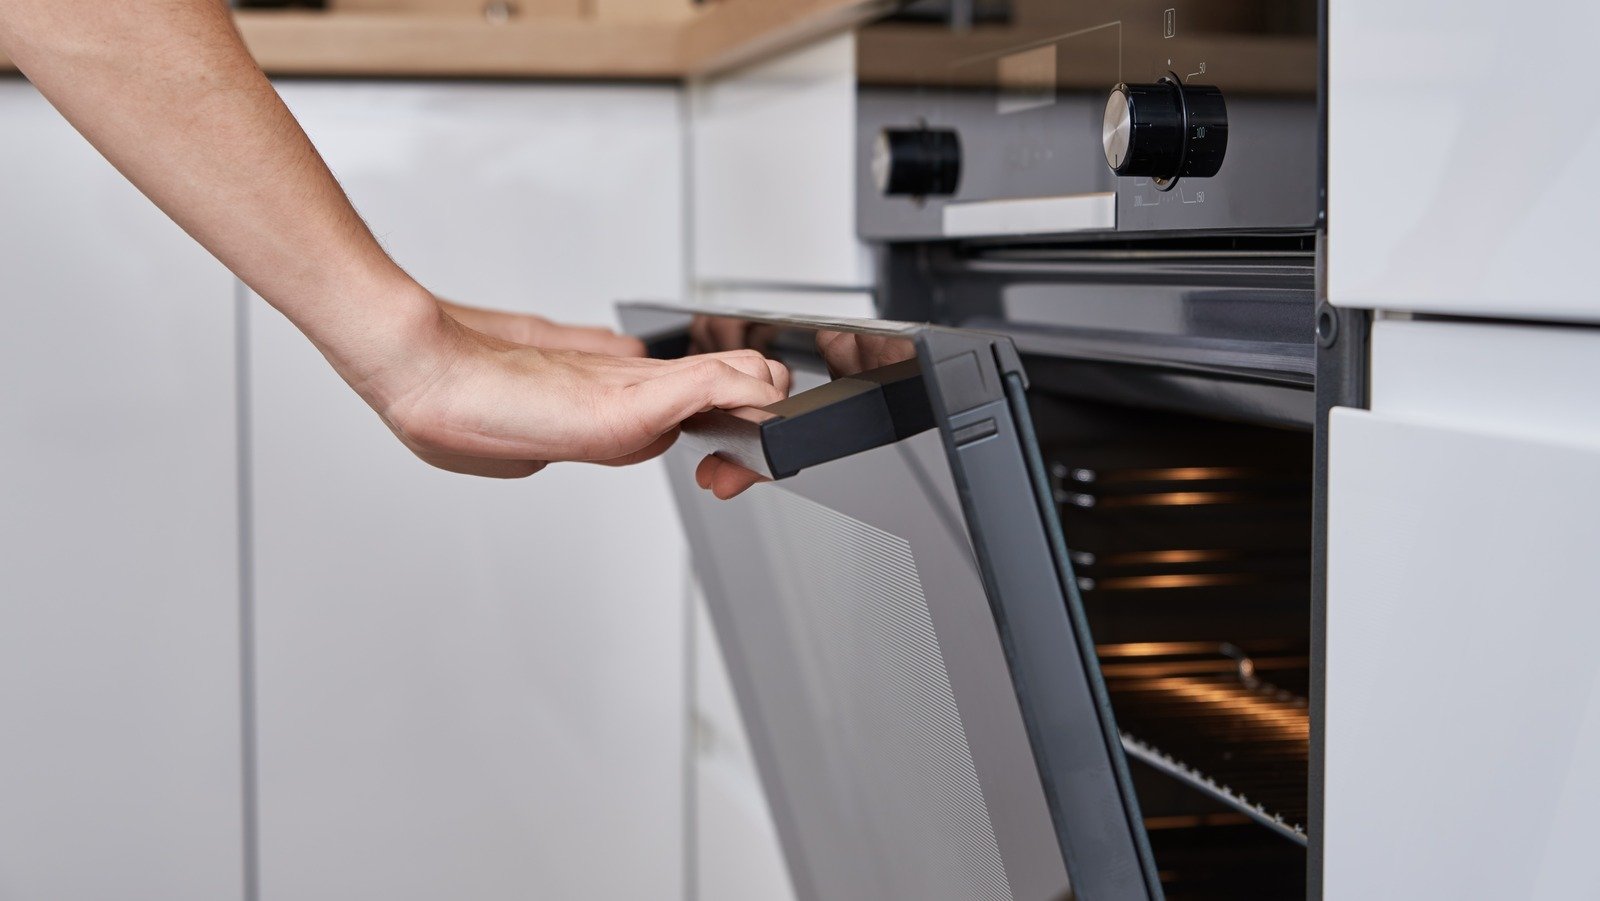 Precautions You Should Be Taking When Self-Cleaning Your Oven